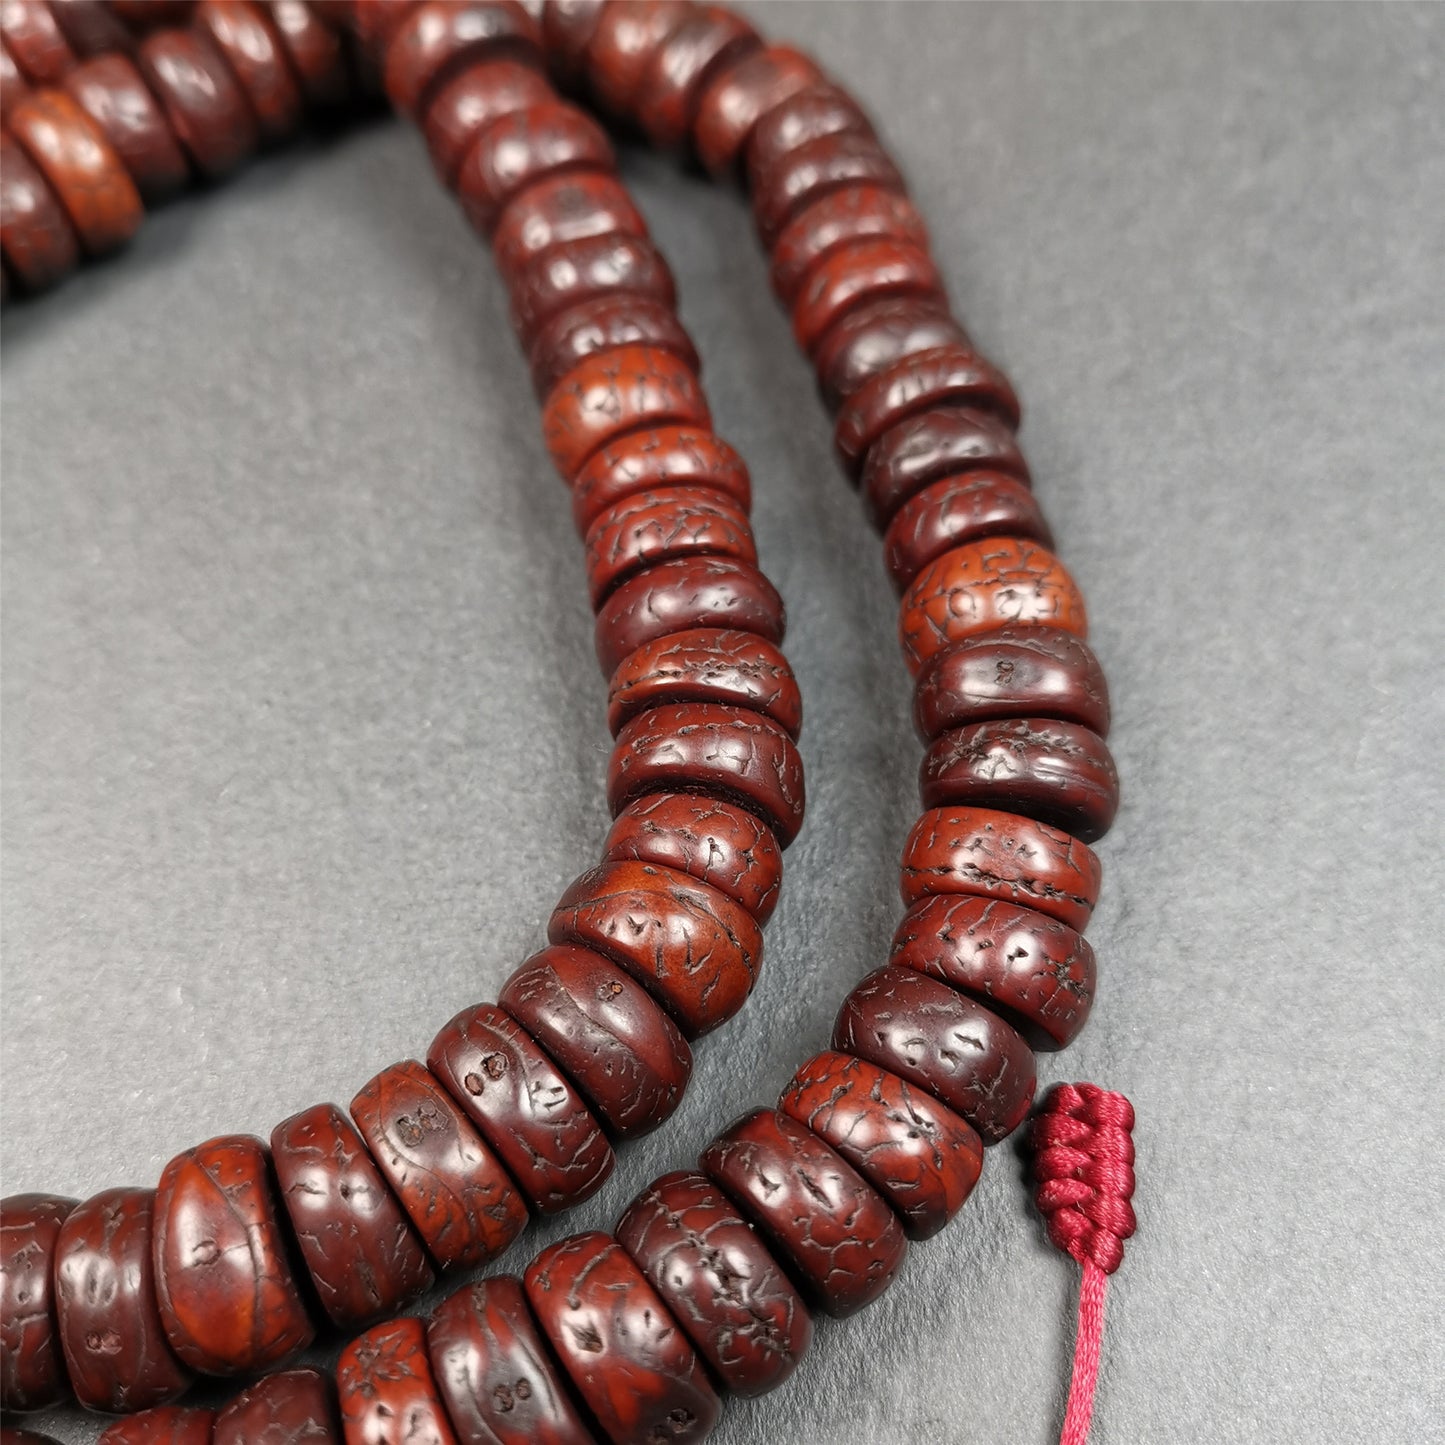 This bodhi seed mala was collected from Derge county,about 30 years old,hold and blessed by a lama. It is composed of 108 bodhi seed beads, bevel cut shape,brown color,approximately 13mm / 0.5 inch ,perimeter is about 70cm,27.5 inches.